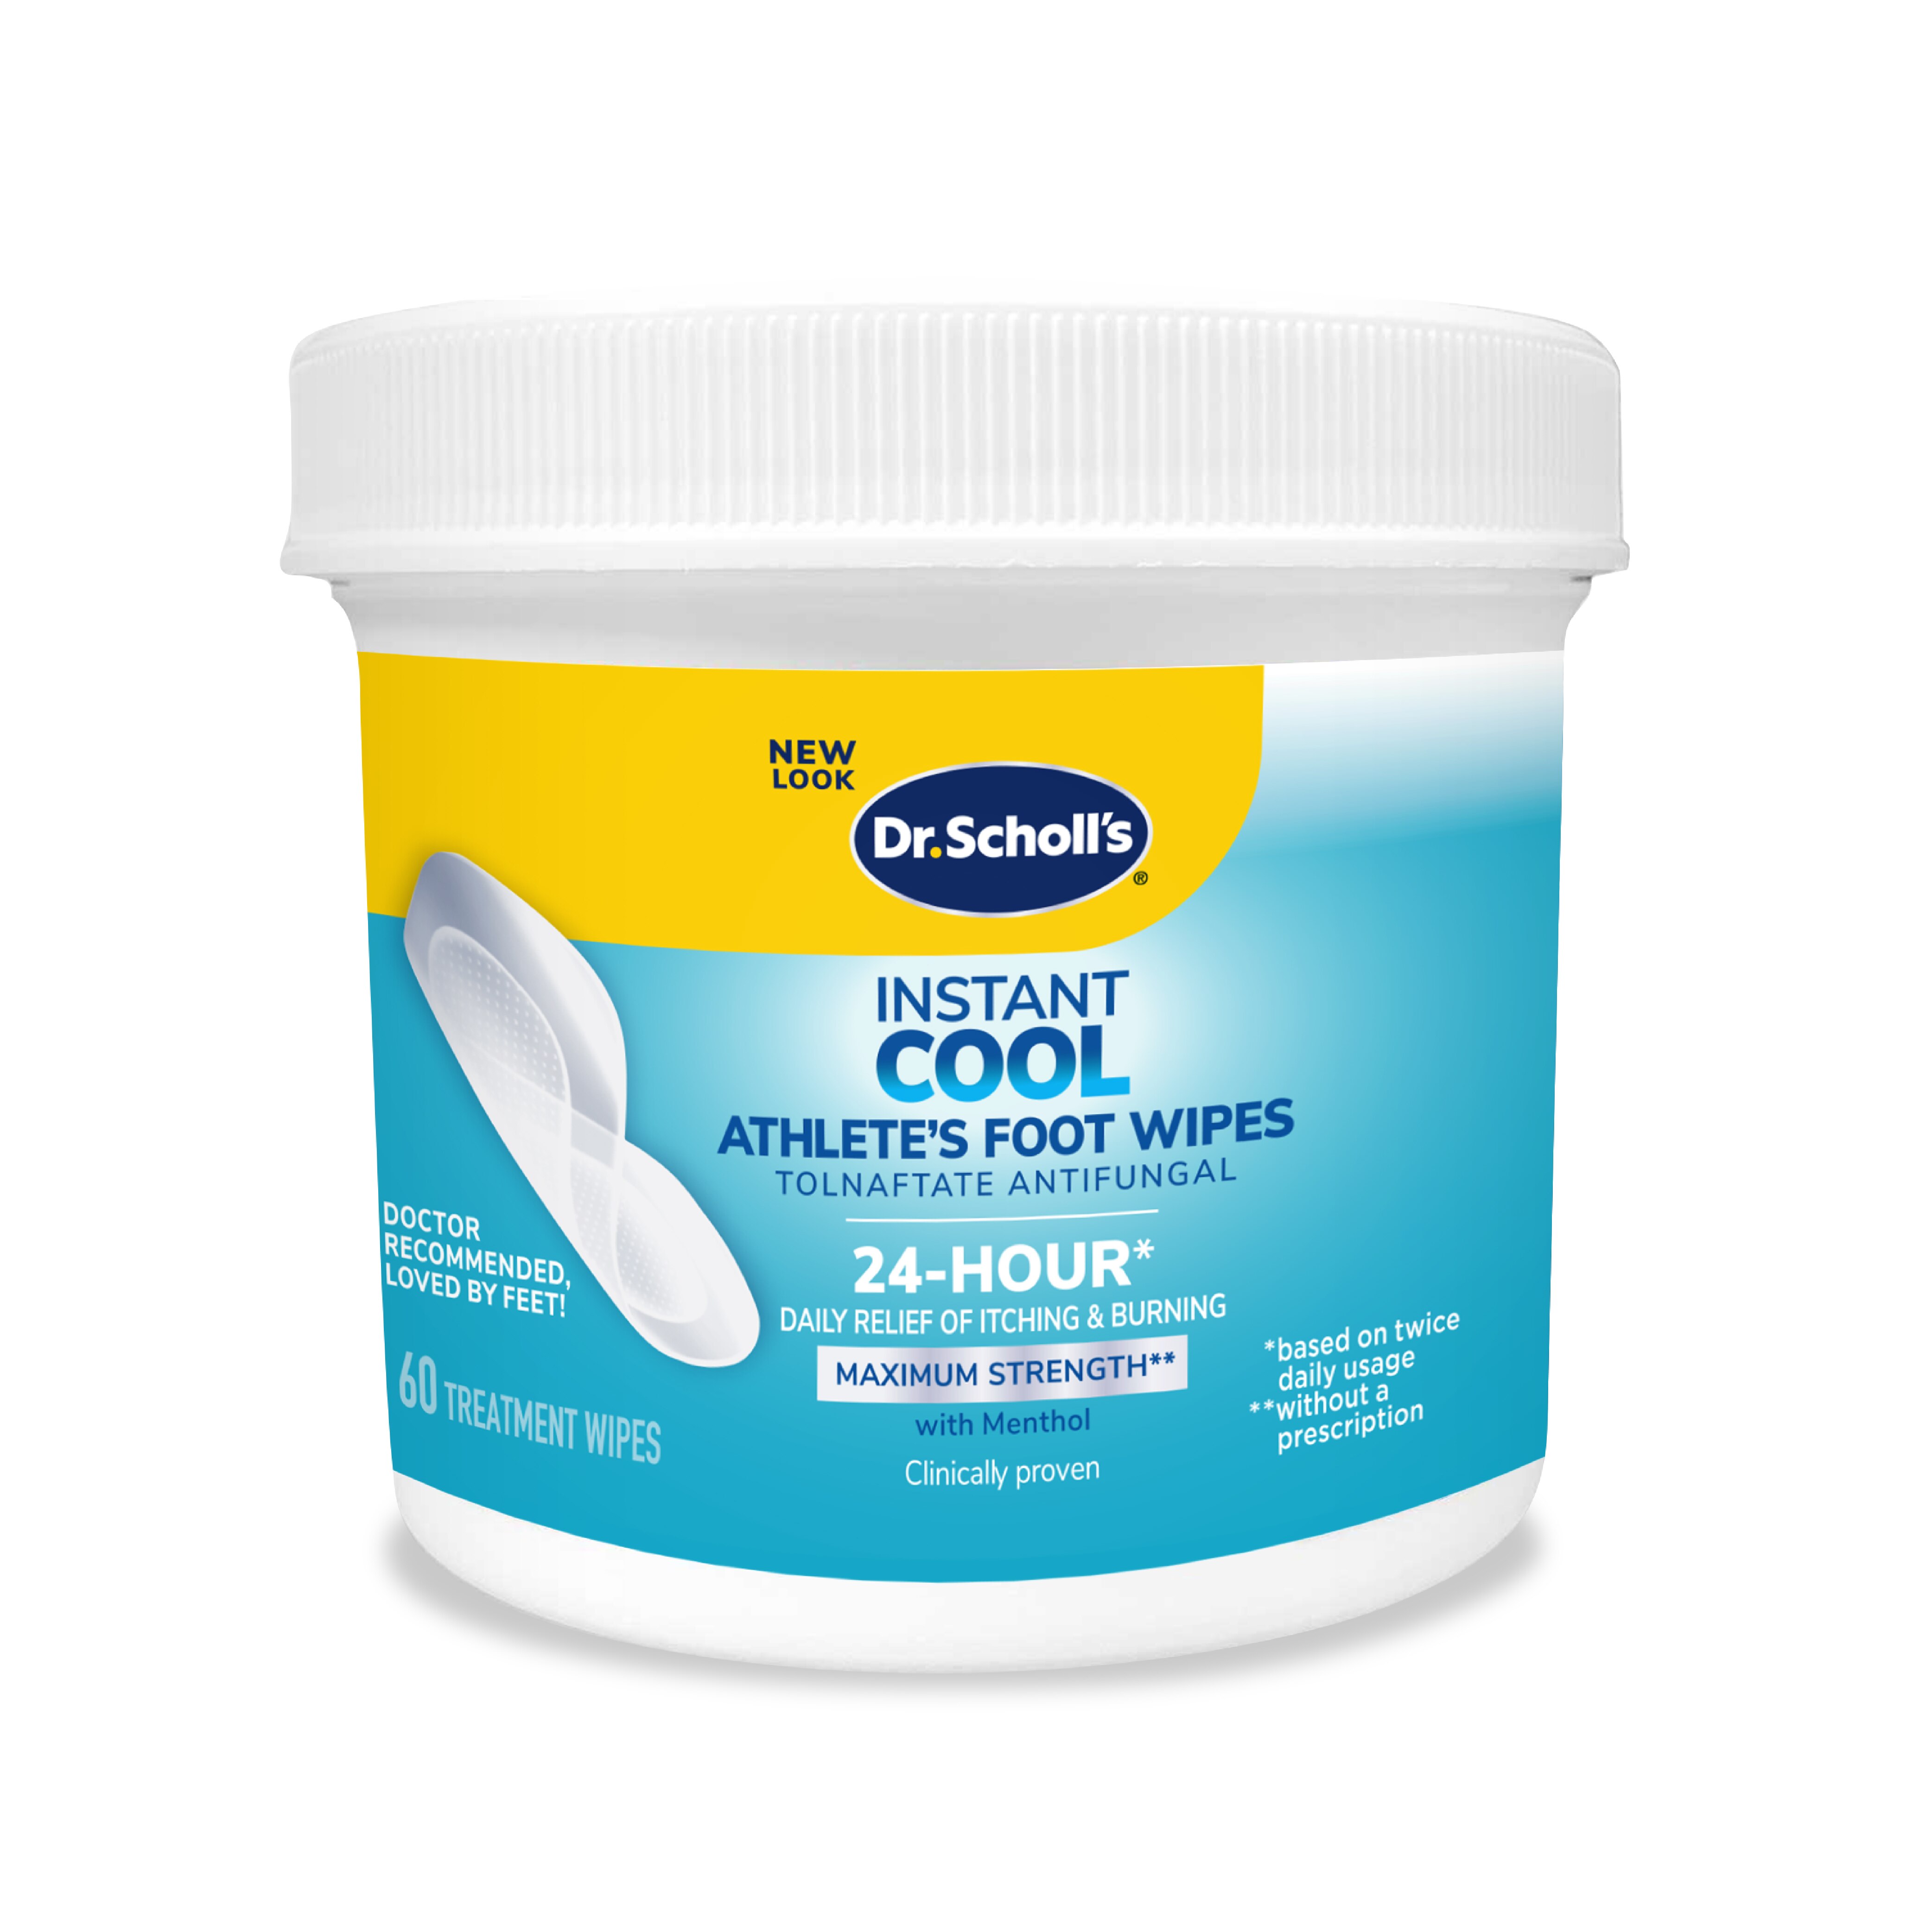 Dr. Scholl's Instant Cool Athlete's Foot Treatment Wipes, 60 CT